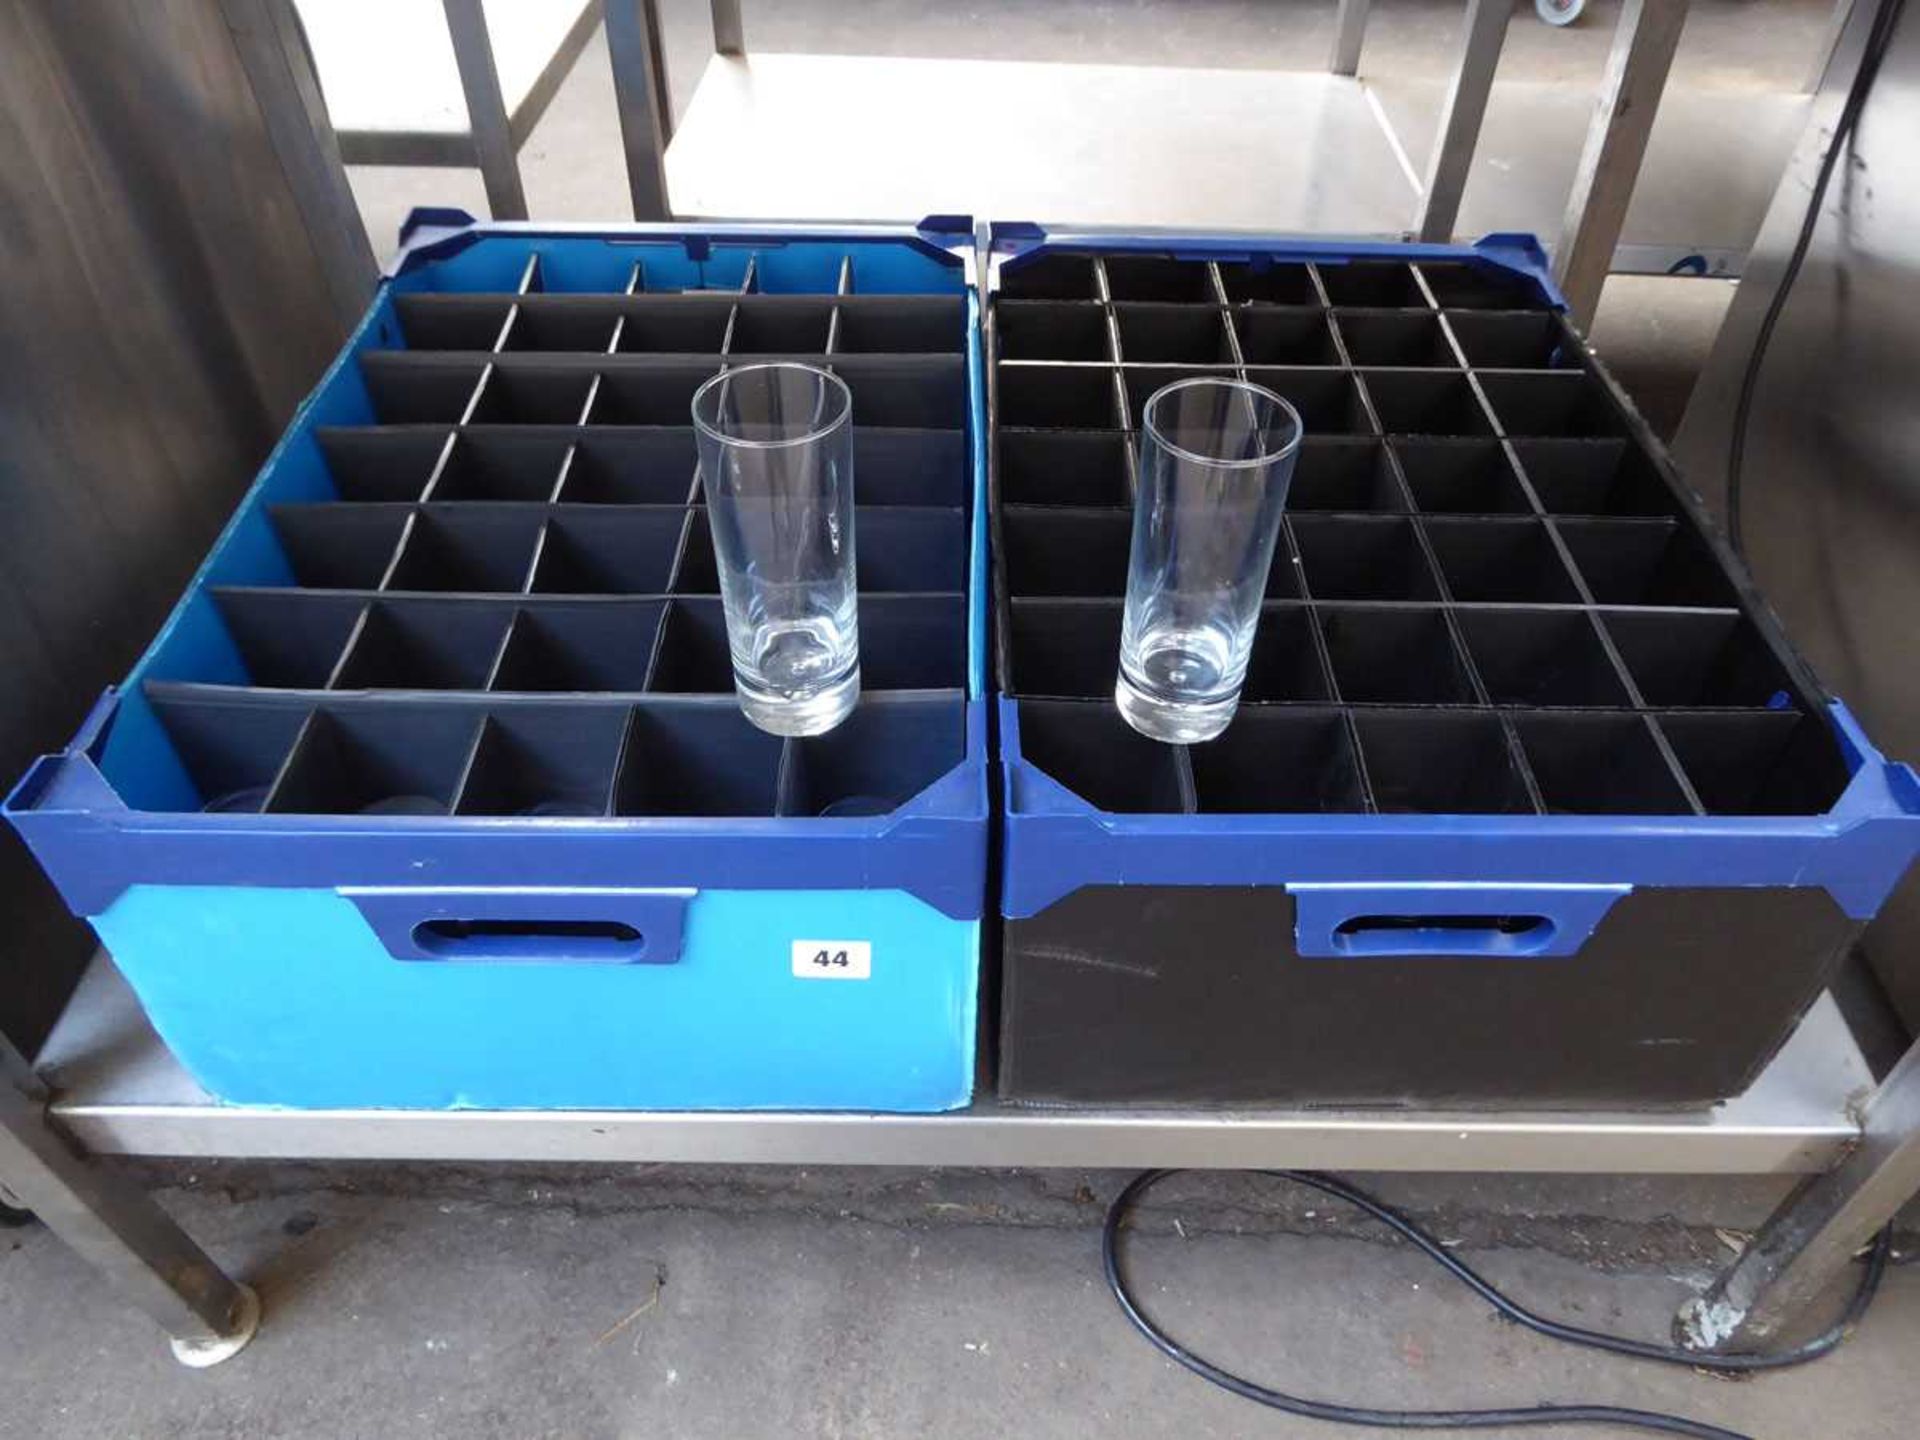 2 plastic crates containing a large qty of glass high ball glasses